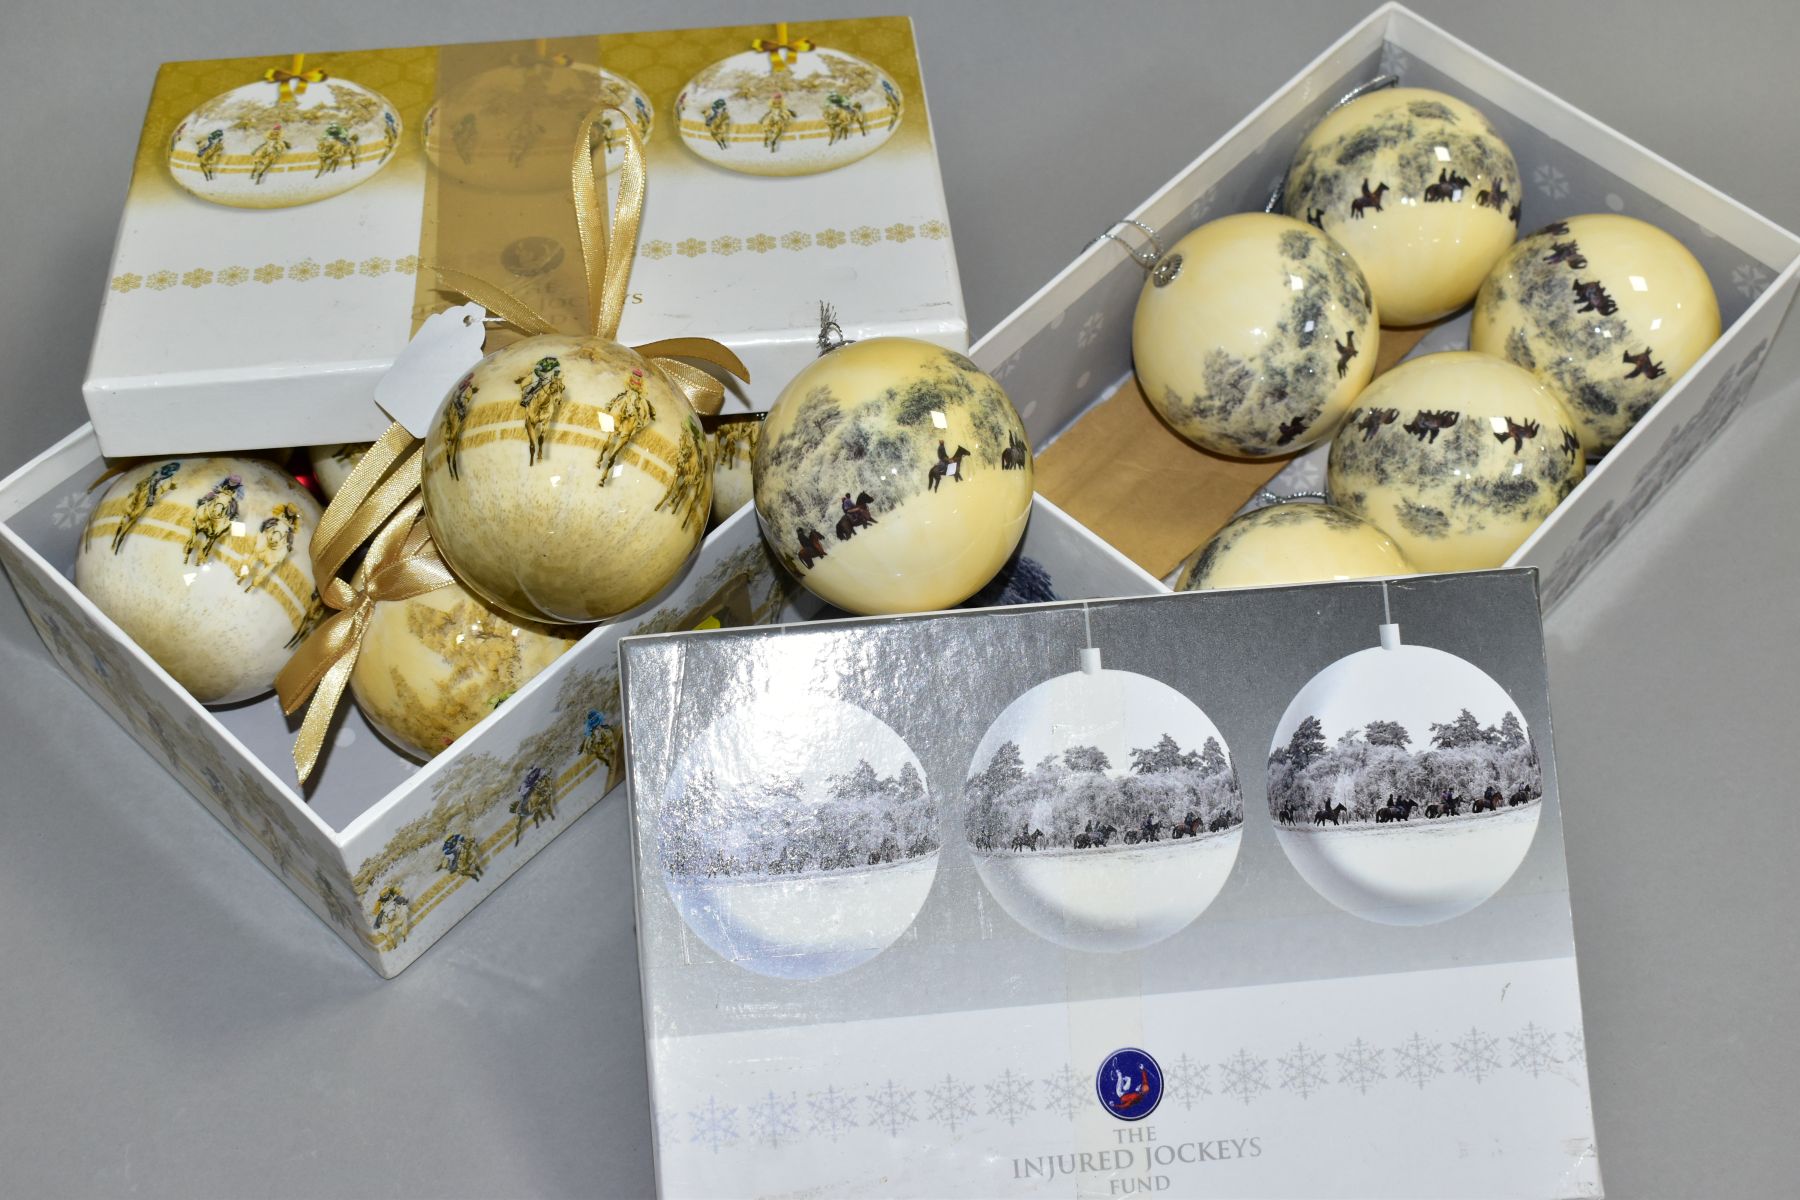 TWO BOXED SETS OF SIX 'THE INJURED JOCKEY FUND' CHRISTMAS BAUBLES (2) - Image 4 of 4